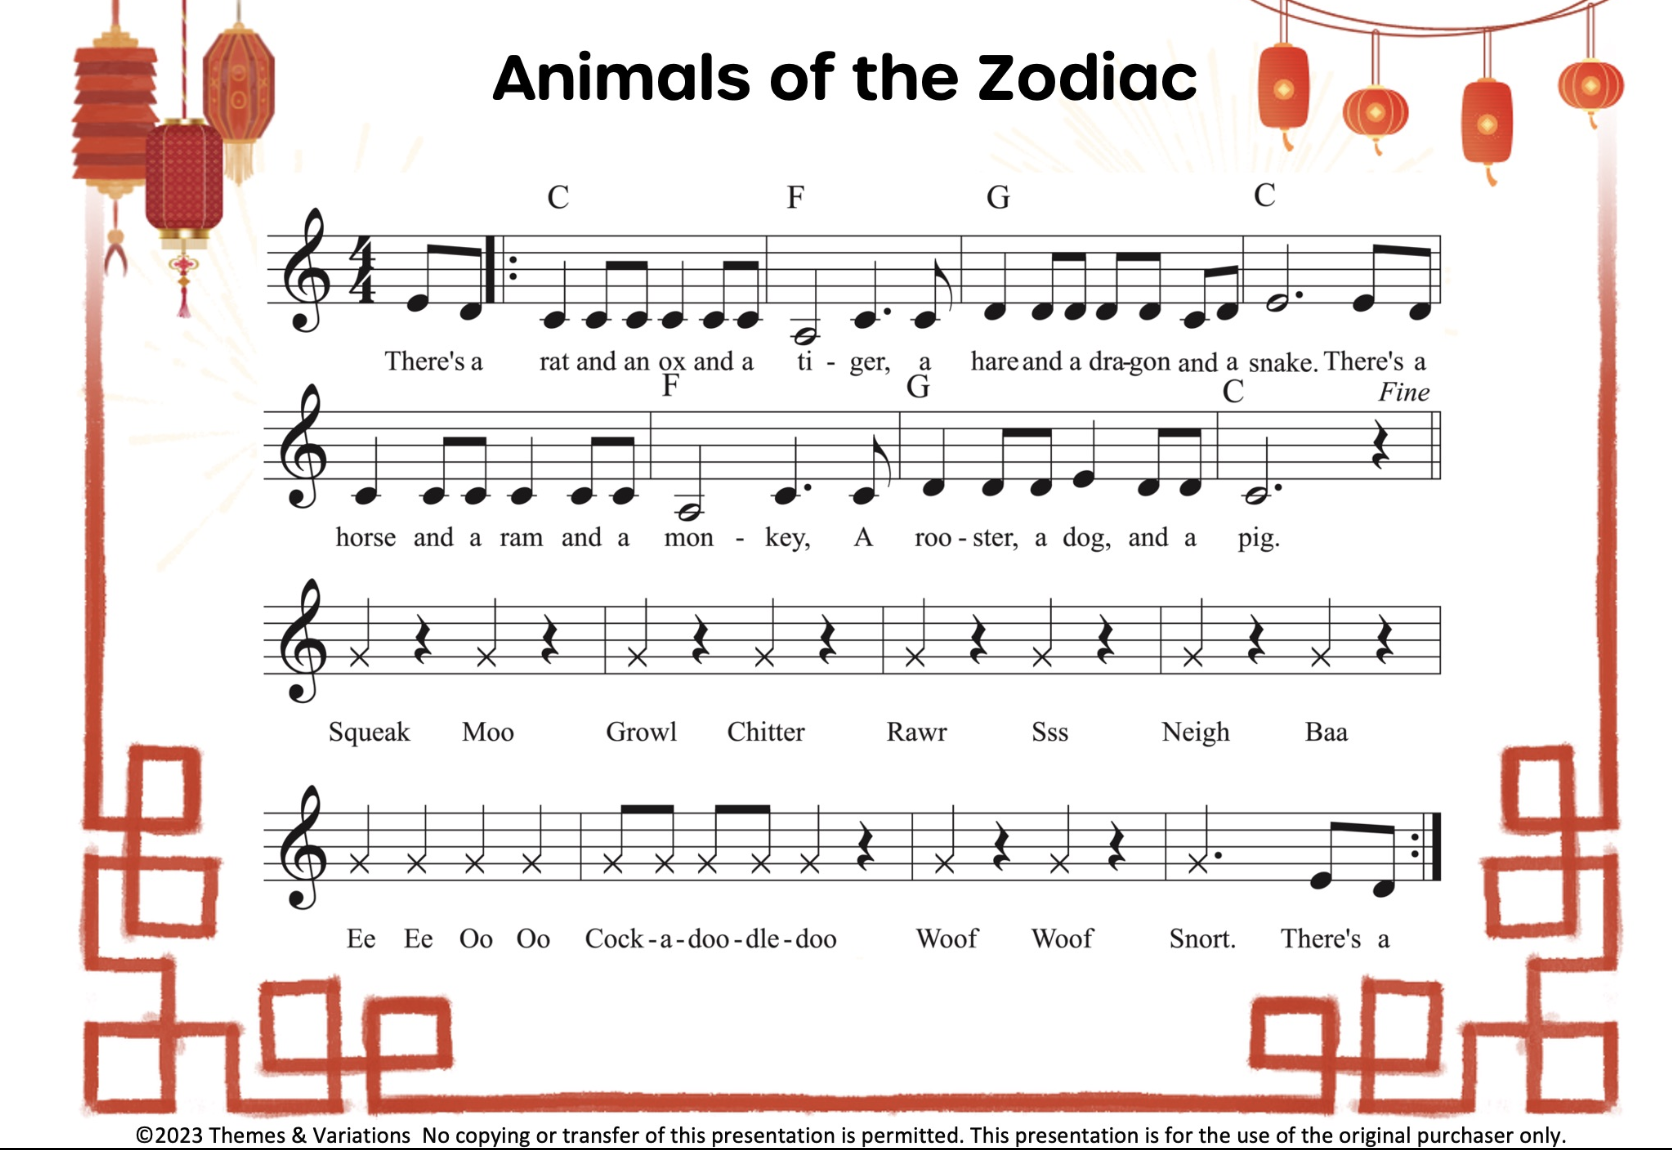 Animals of the Zodiac song